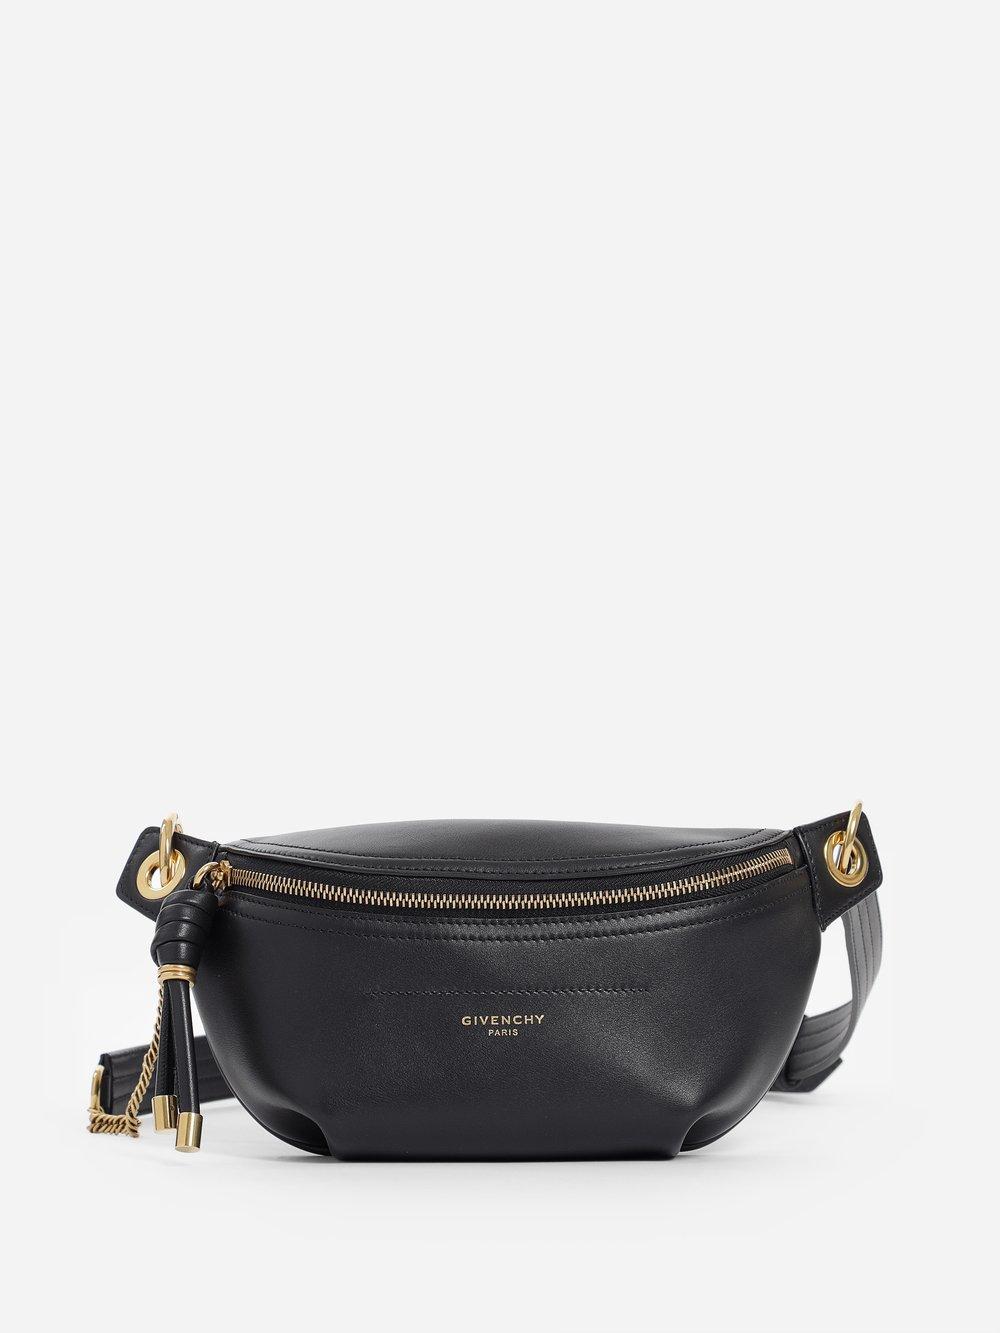 Total 61+ imagen givenchy fanny pack women’s